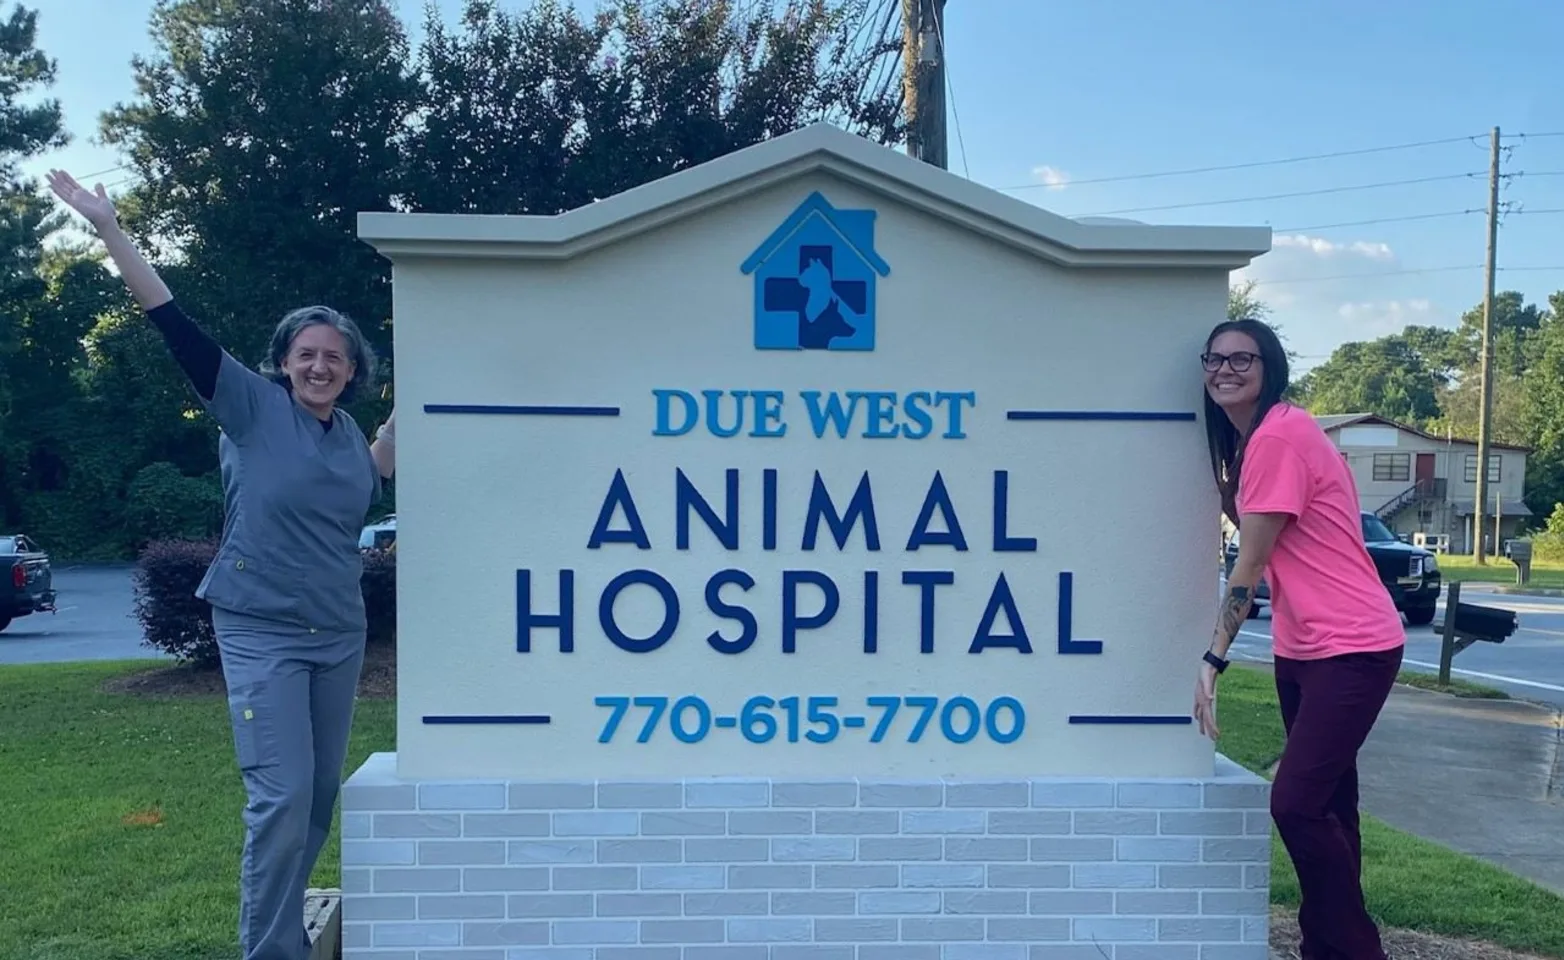 Sign at Due West Animal Hospital